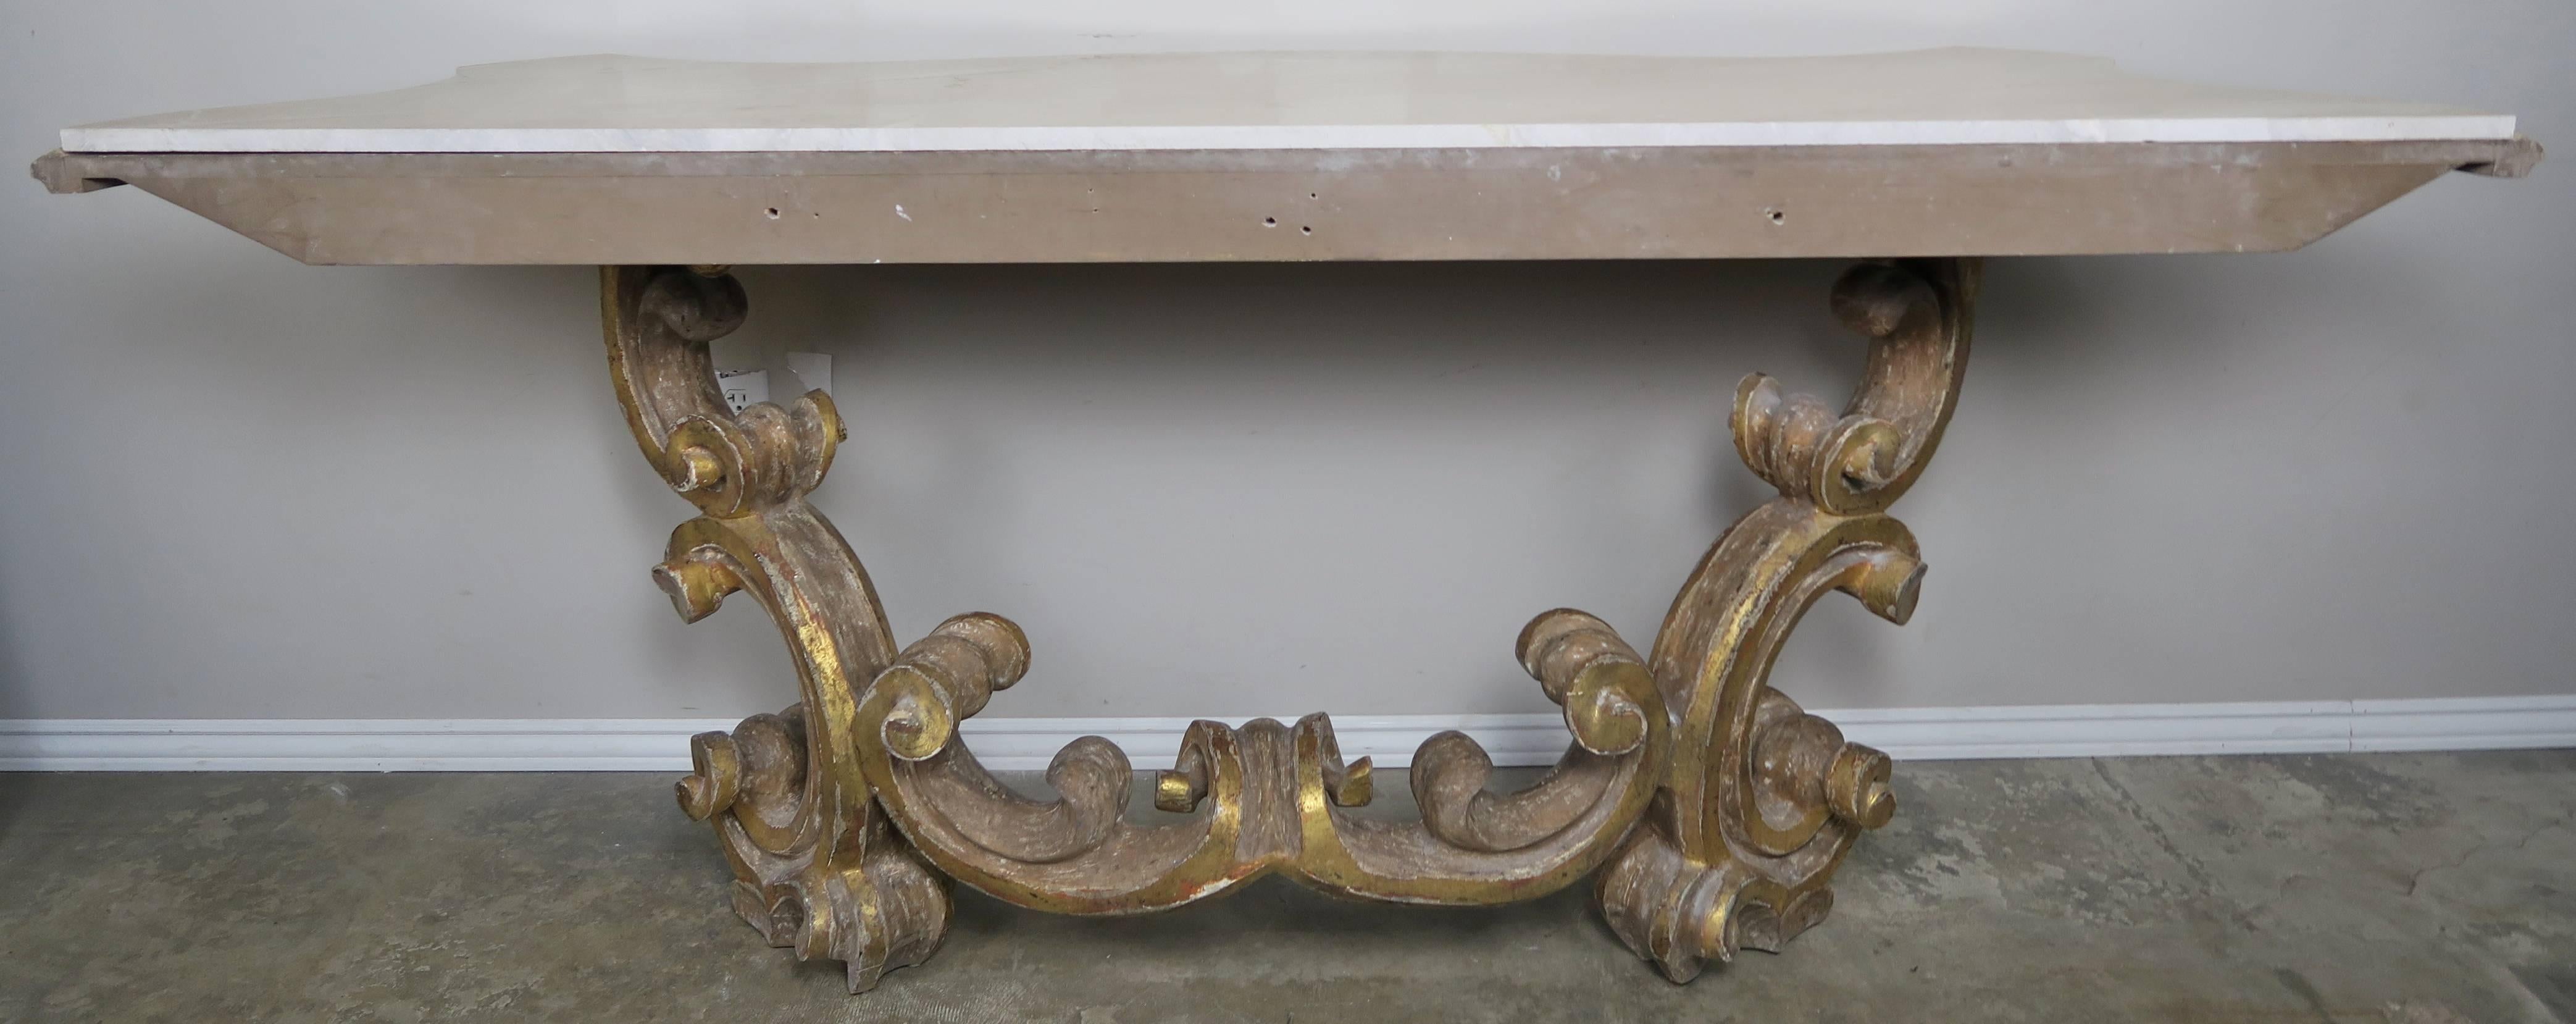 Italian Scrolled Giltwood Marble-Top Carved Console 3